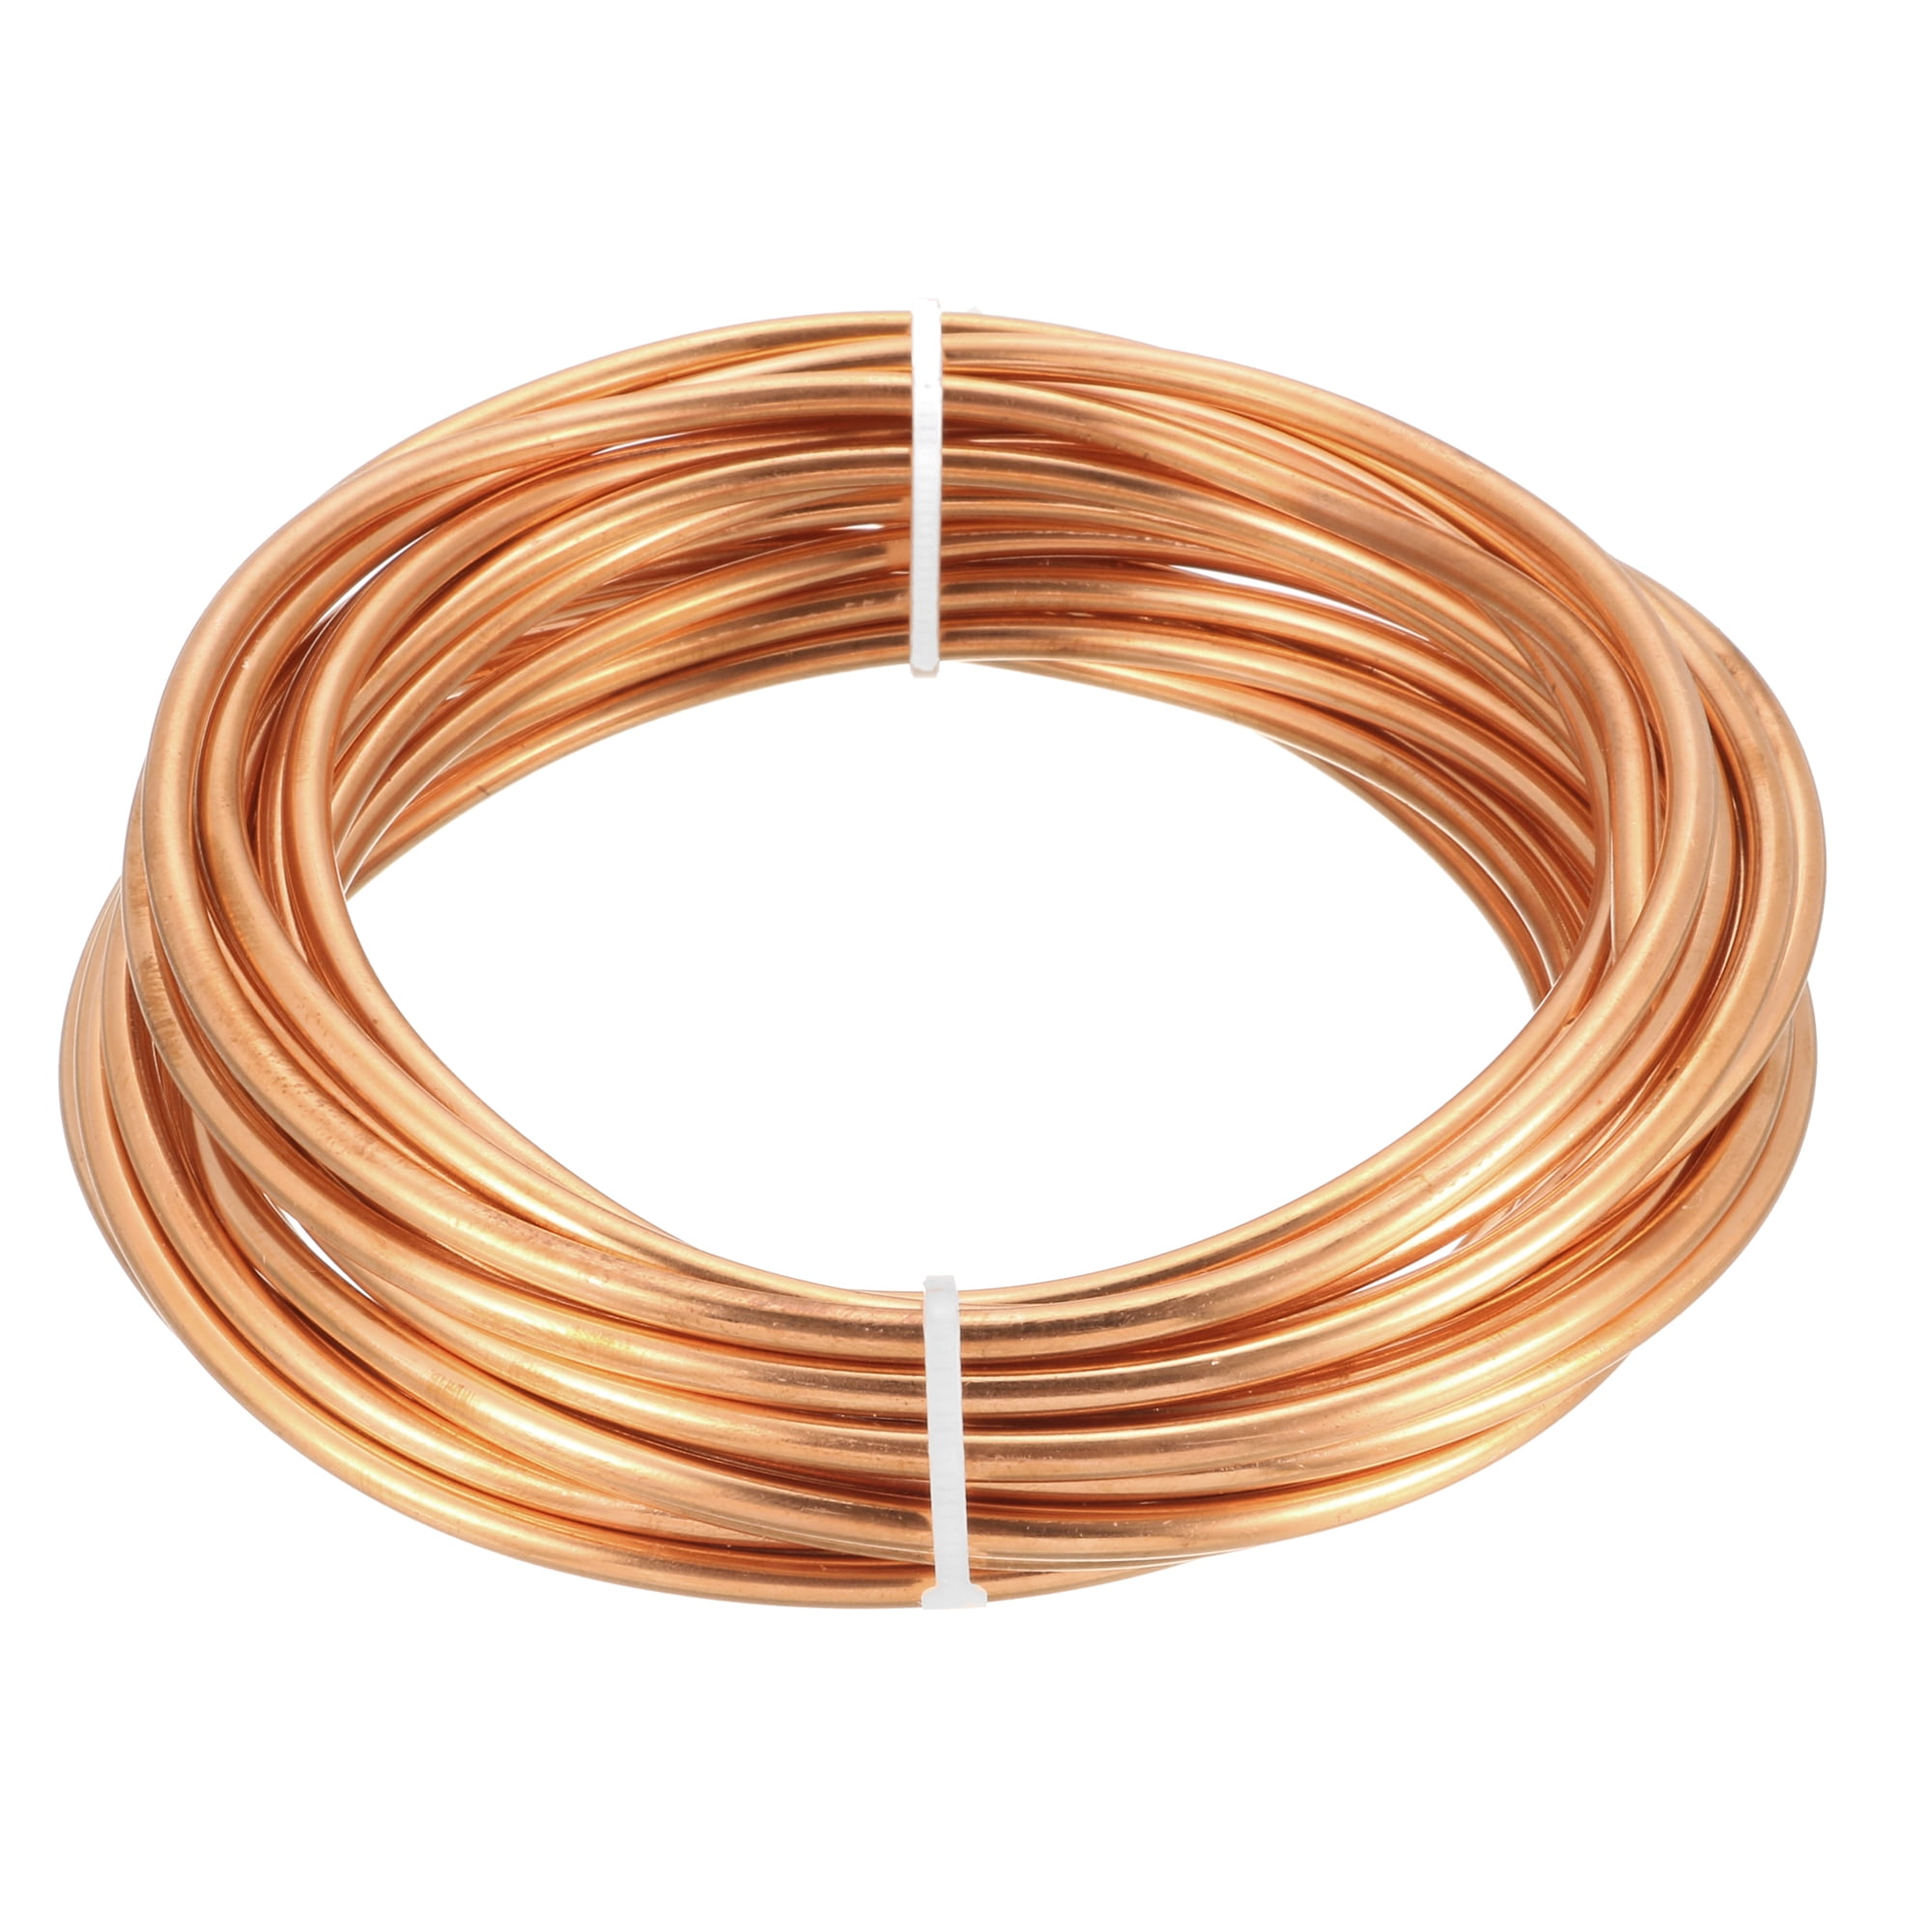 uxcell Refrigeration Tubing 1.6mm OD x 0.6mm ID x 24.5Ft Length Copper Tubing Coil 